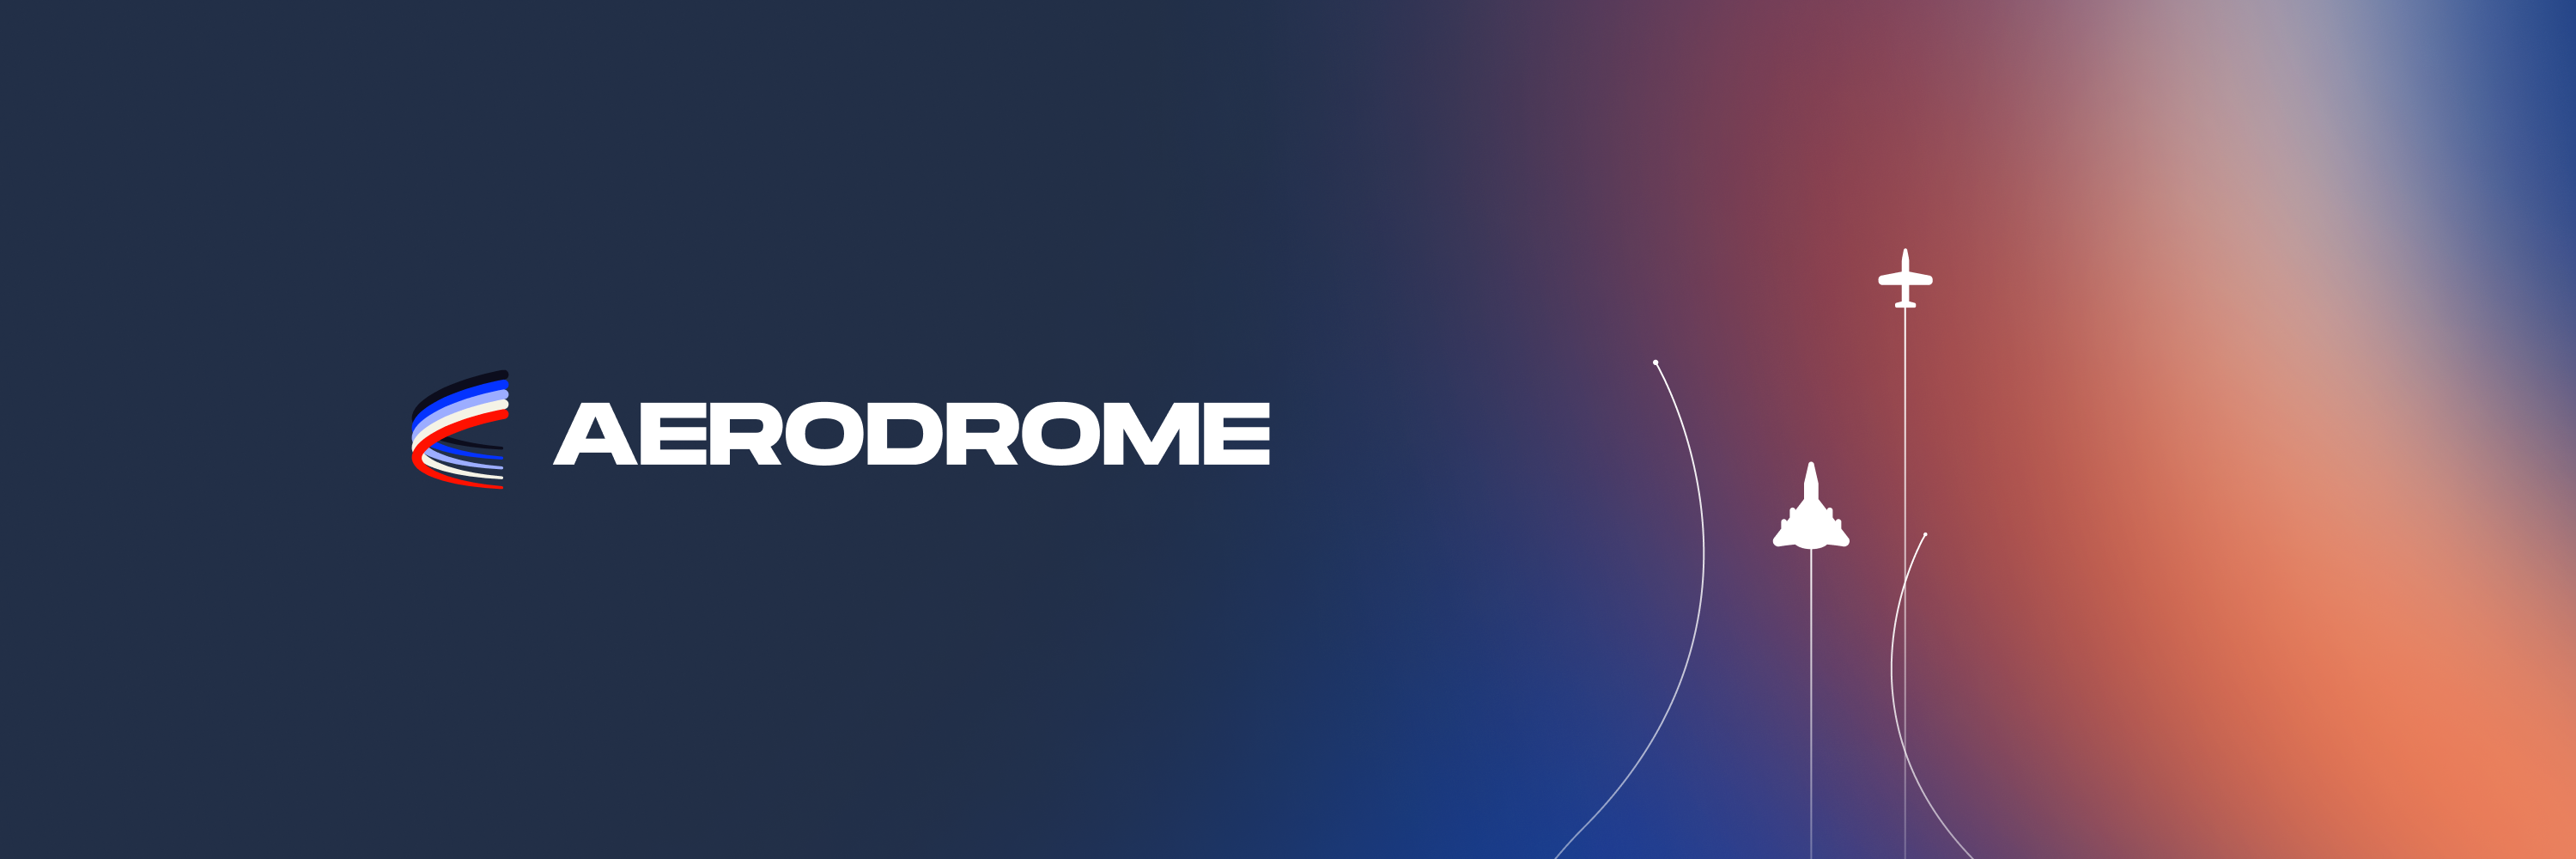 Aerodrome Finance: The central trading and liquidity marketplace on Base network.